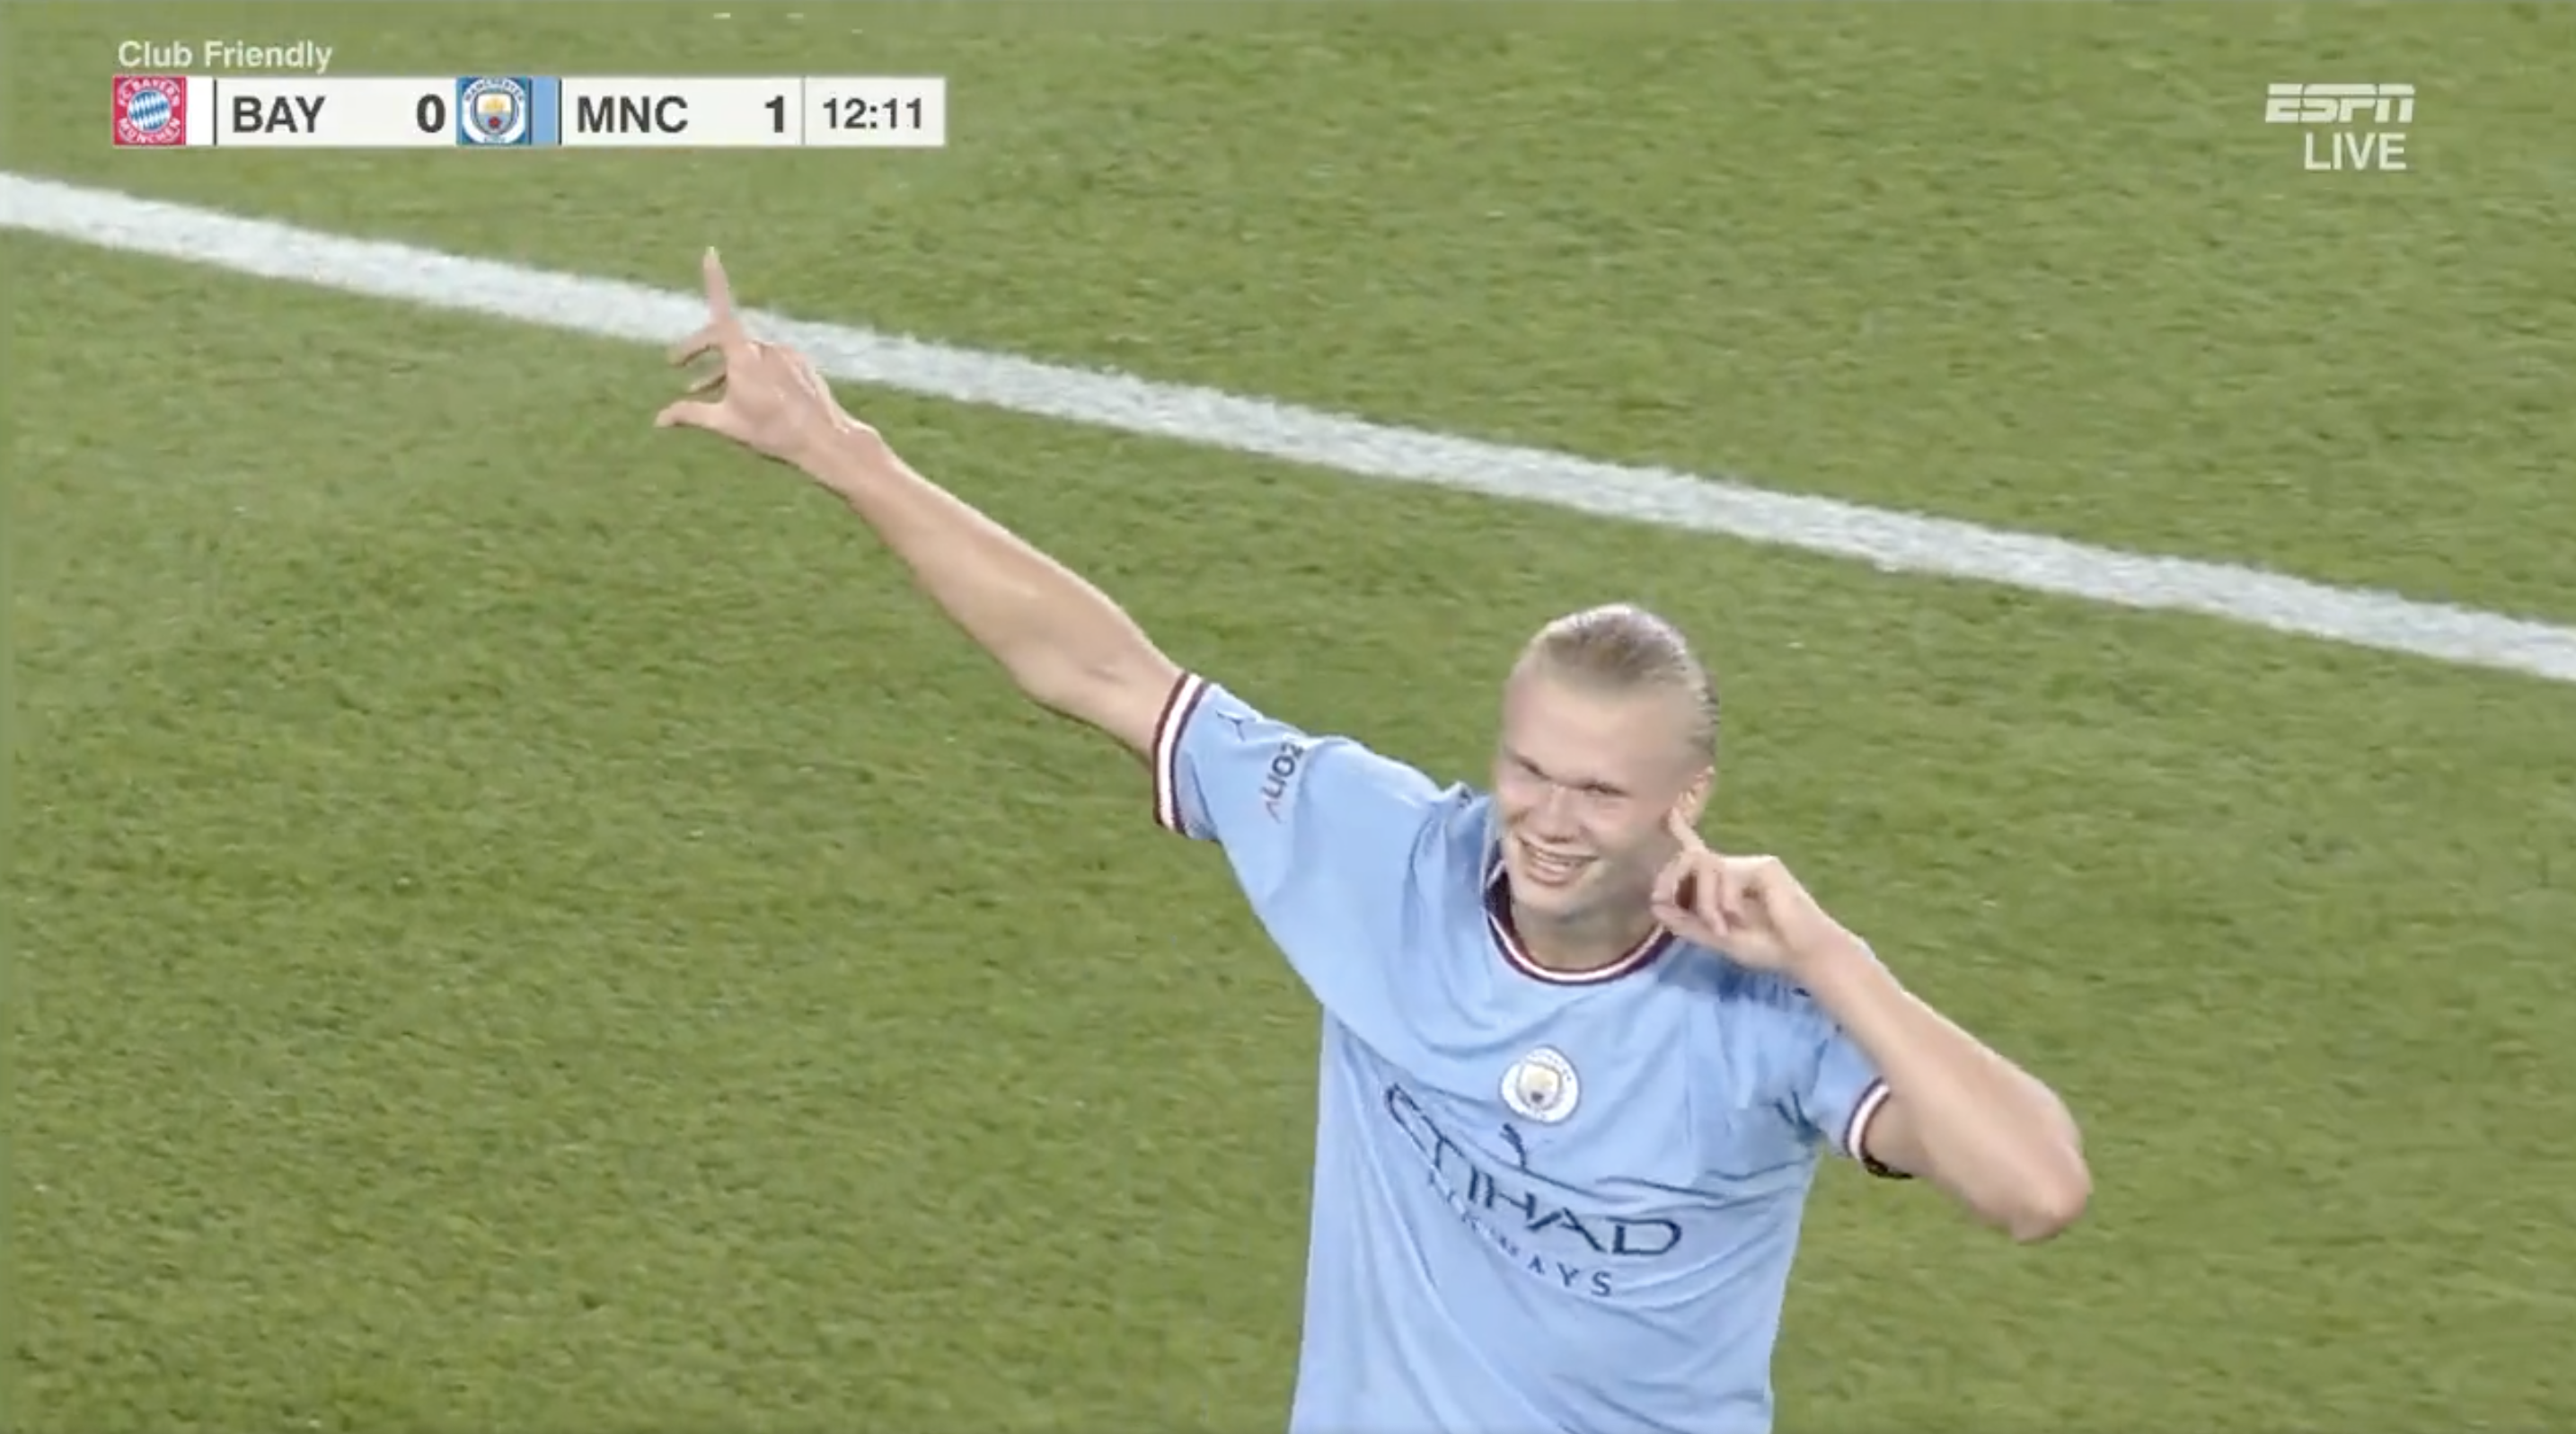 Erling Haaland Scores His First Goal In His Manchester City Debut 12 Minutes In ... Premier League Is Not Ready For This Beast